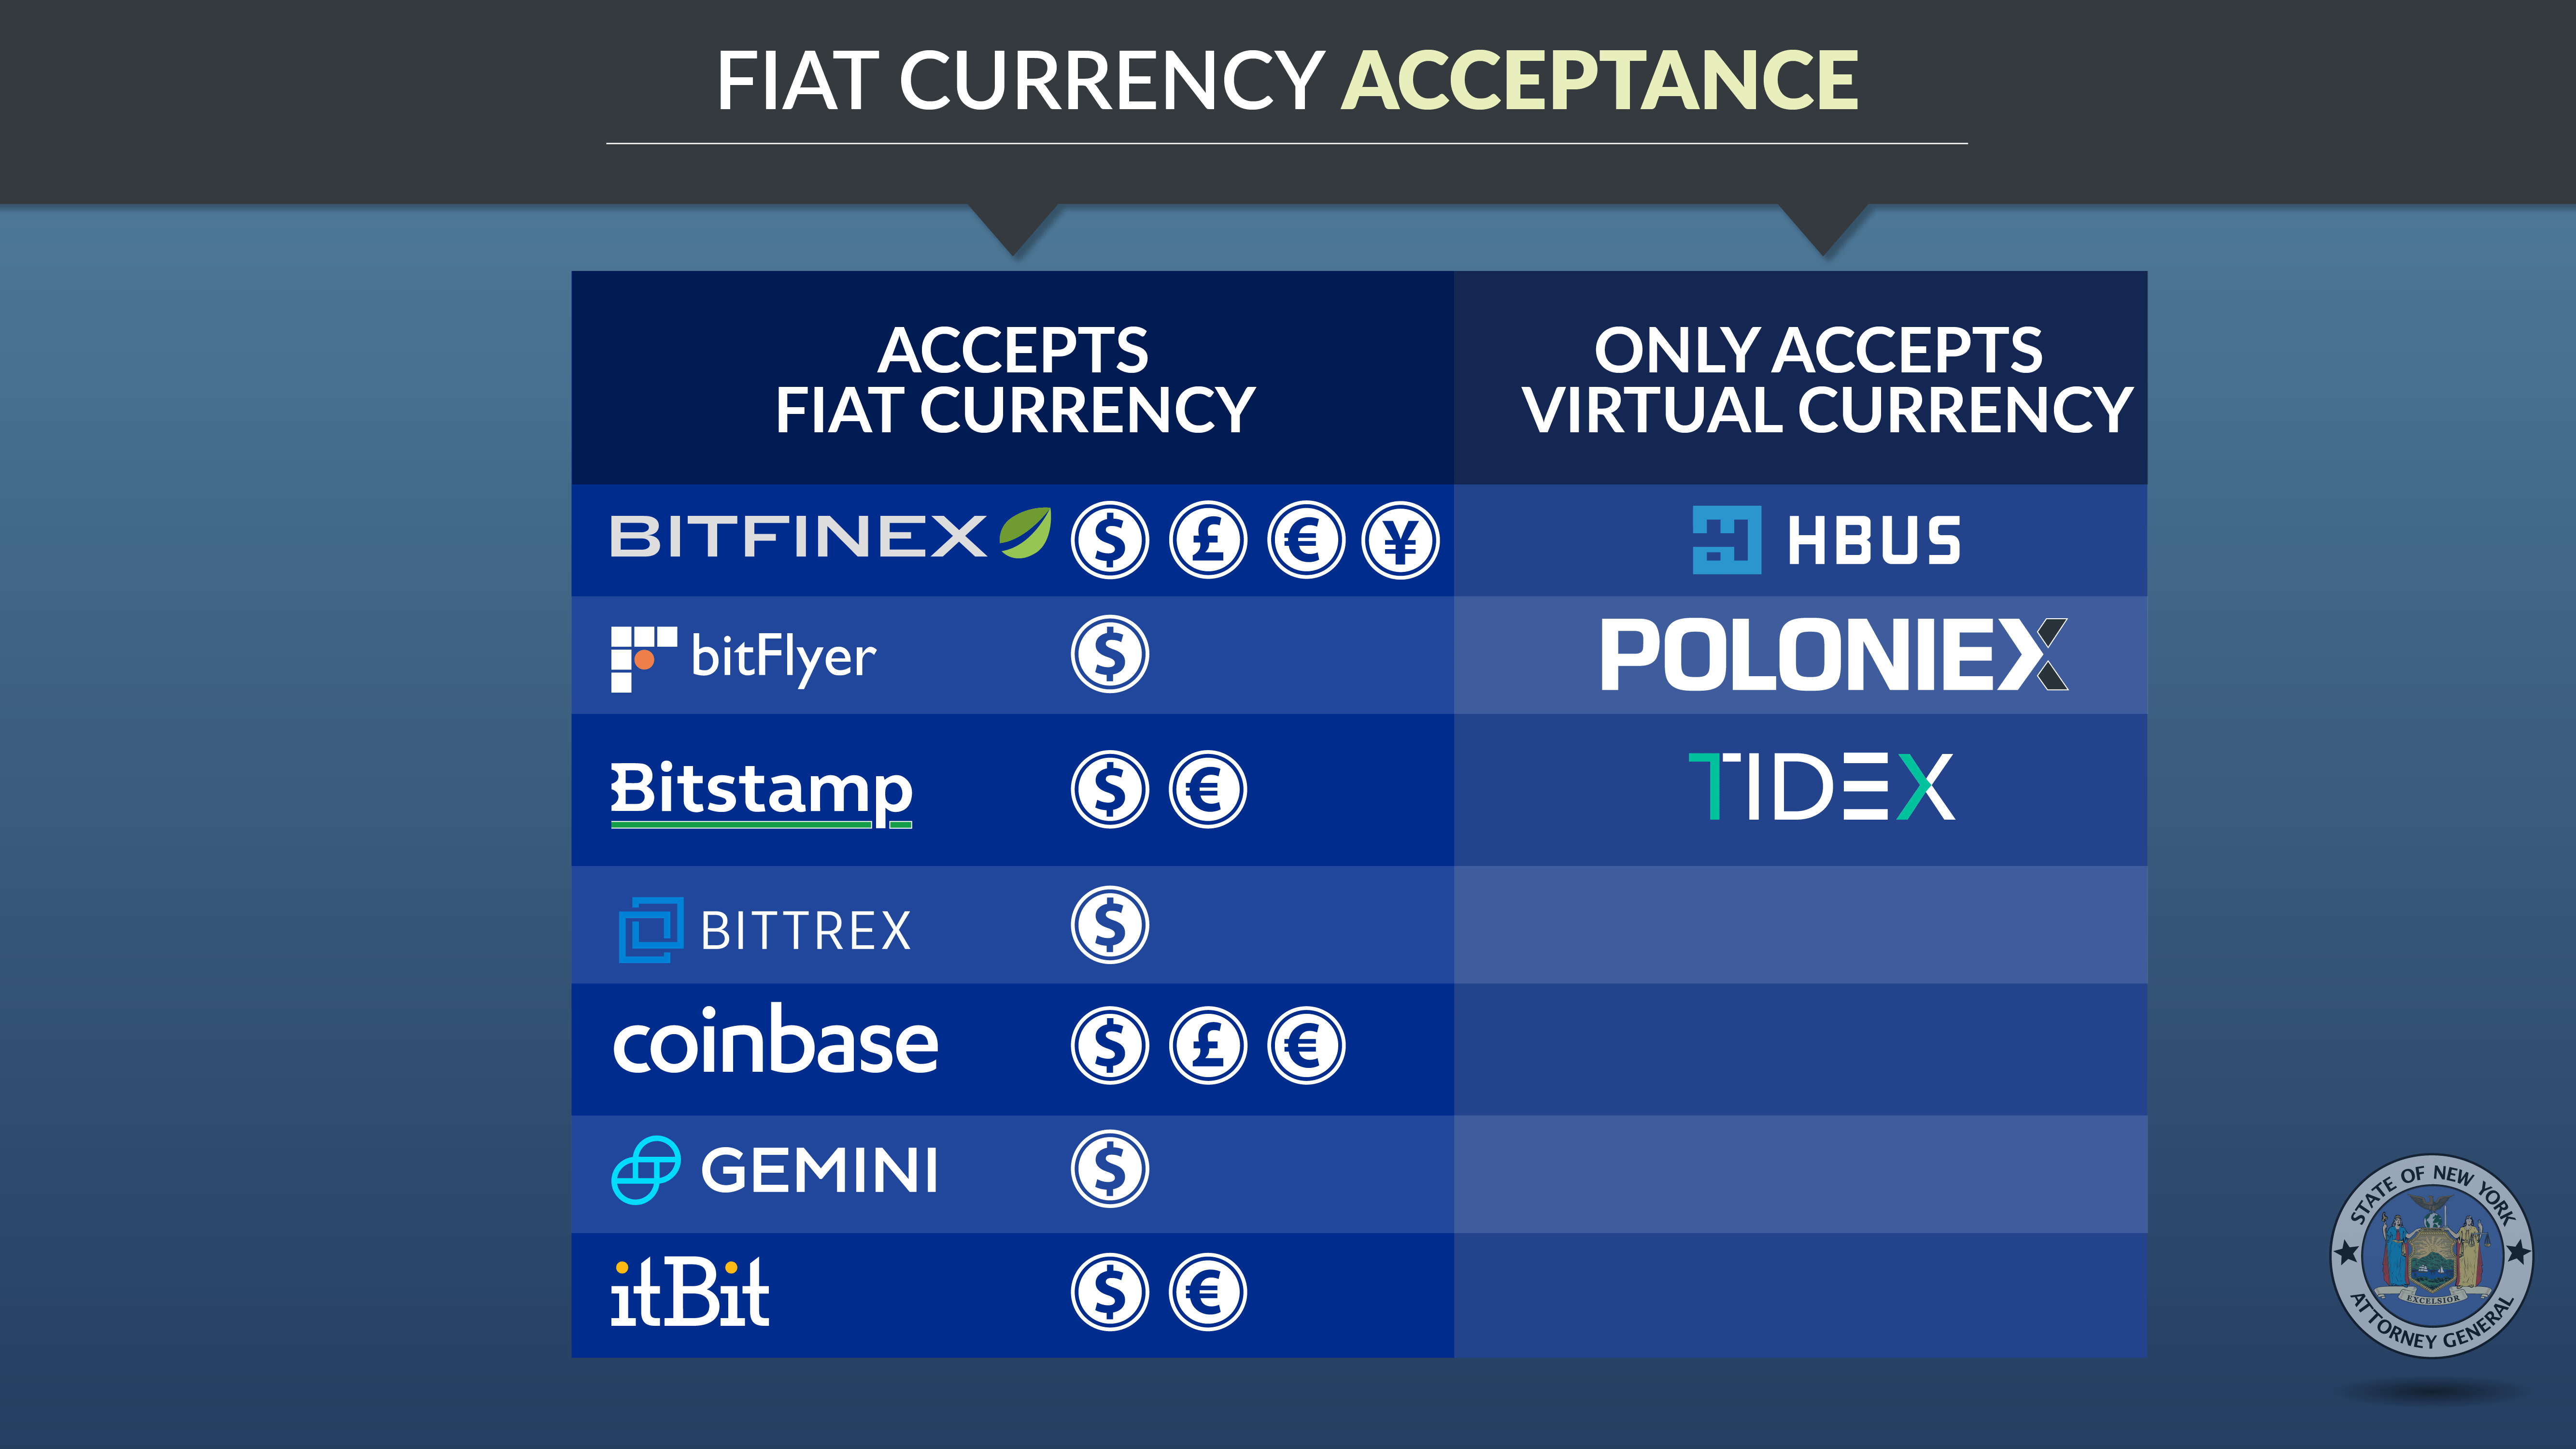 Fiat Currency Acceptance